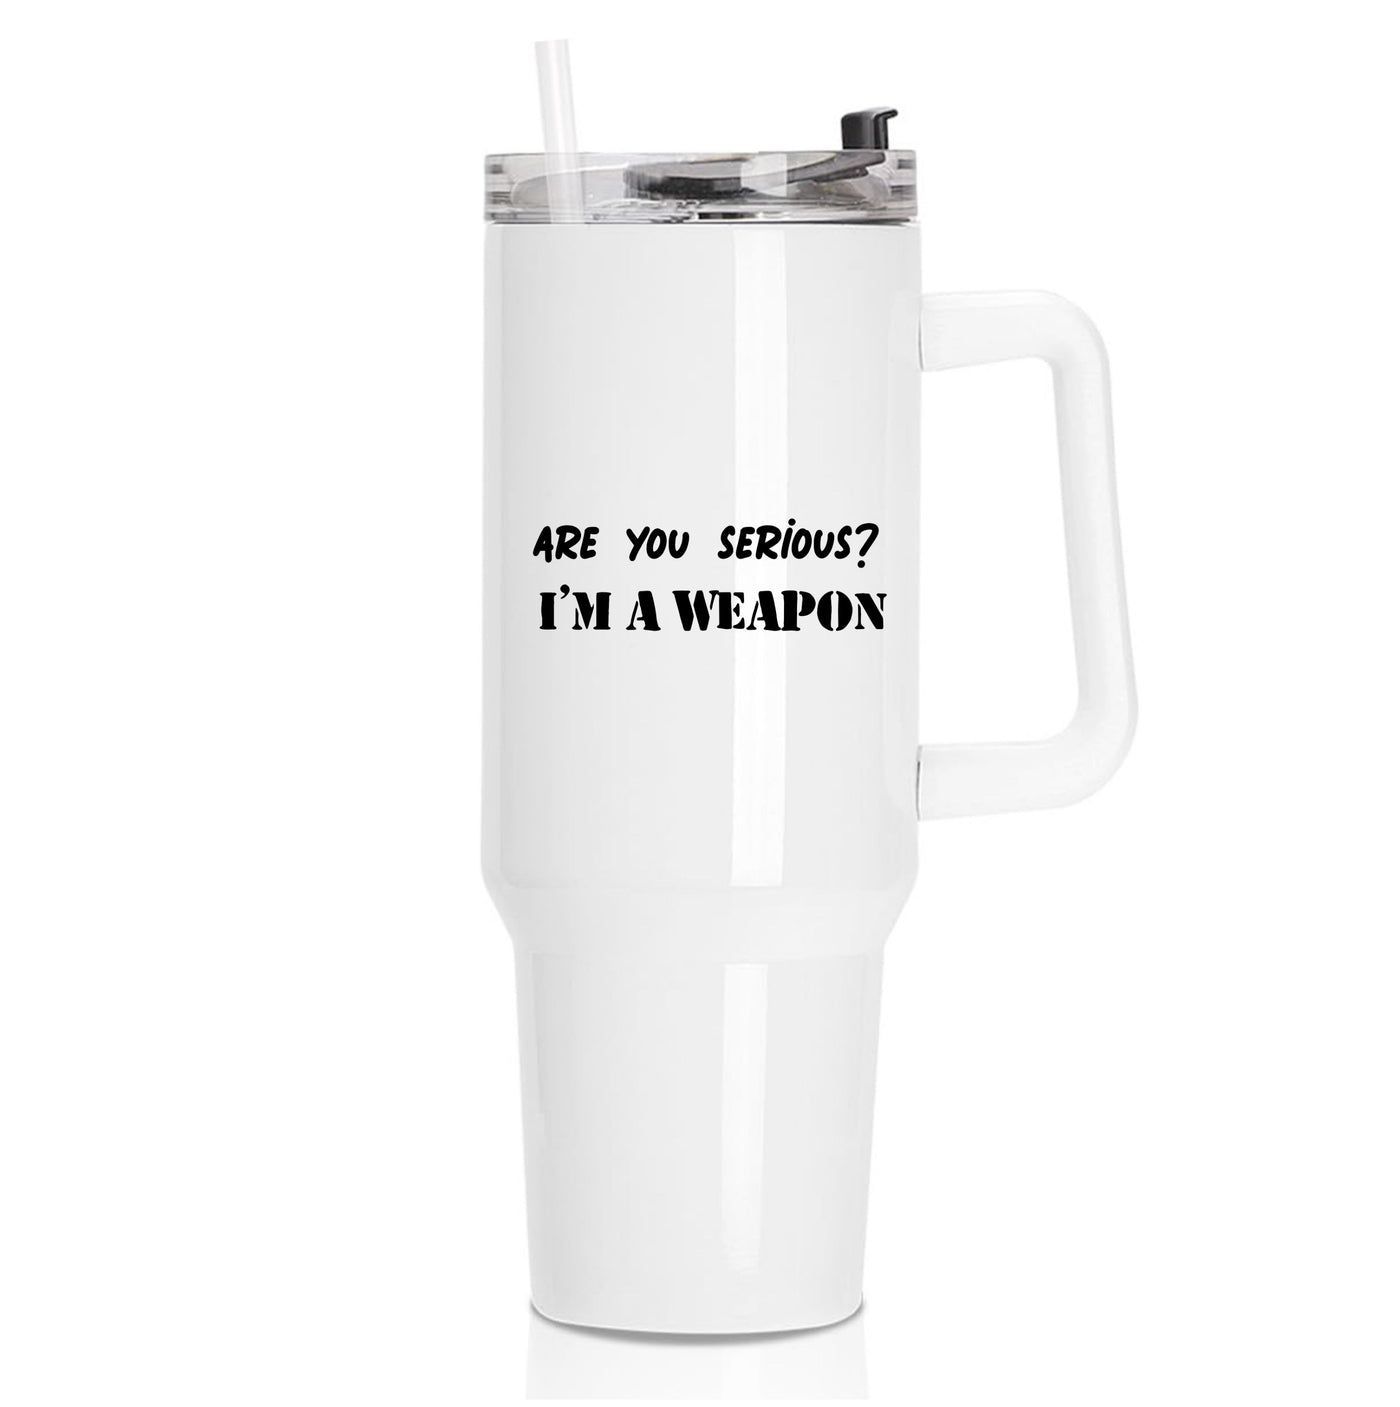 Are You Serious? I'm A Weapon - Islanders Tumbler